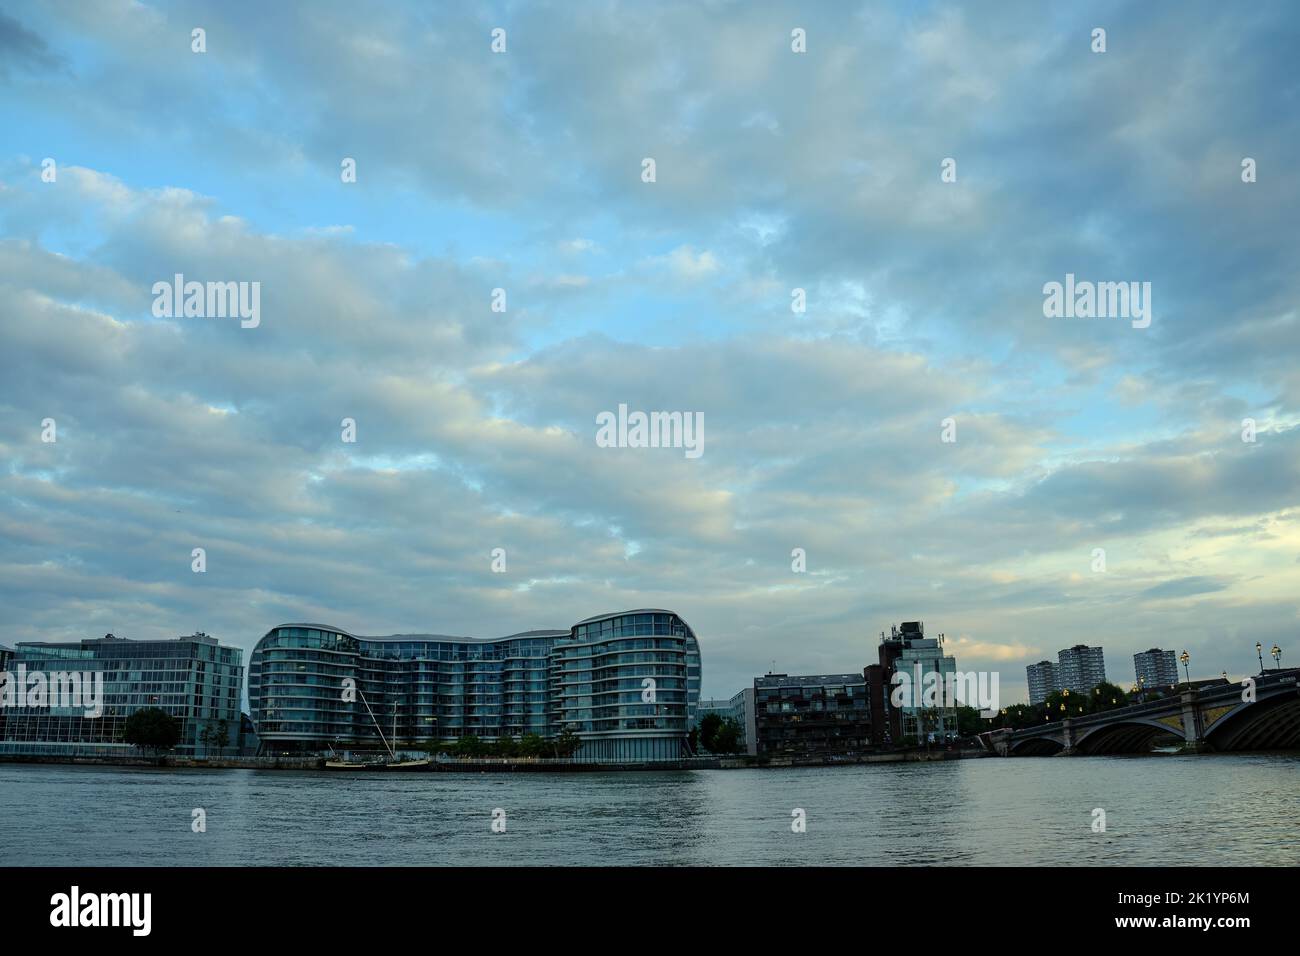 View of the Albion Riverside development on the River Thames from the north side of the river at dusk Stock Photo